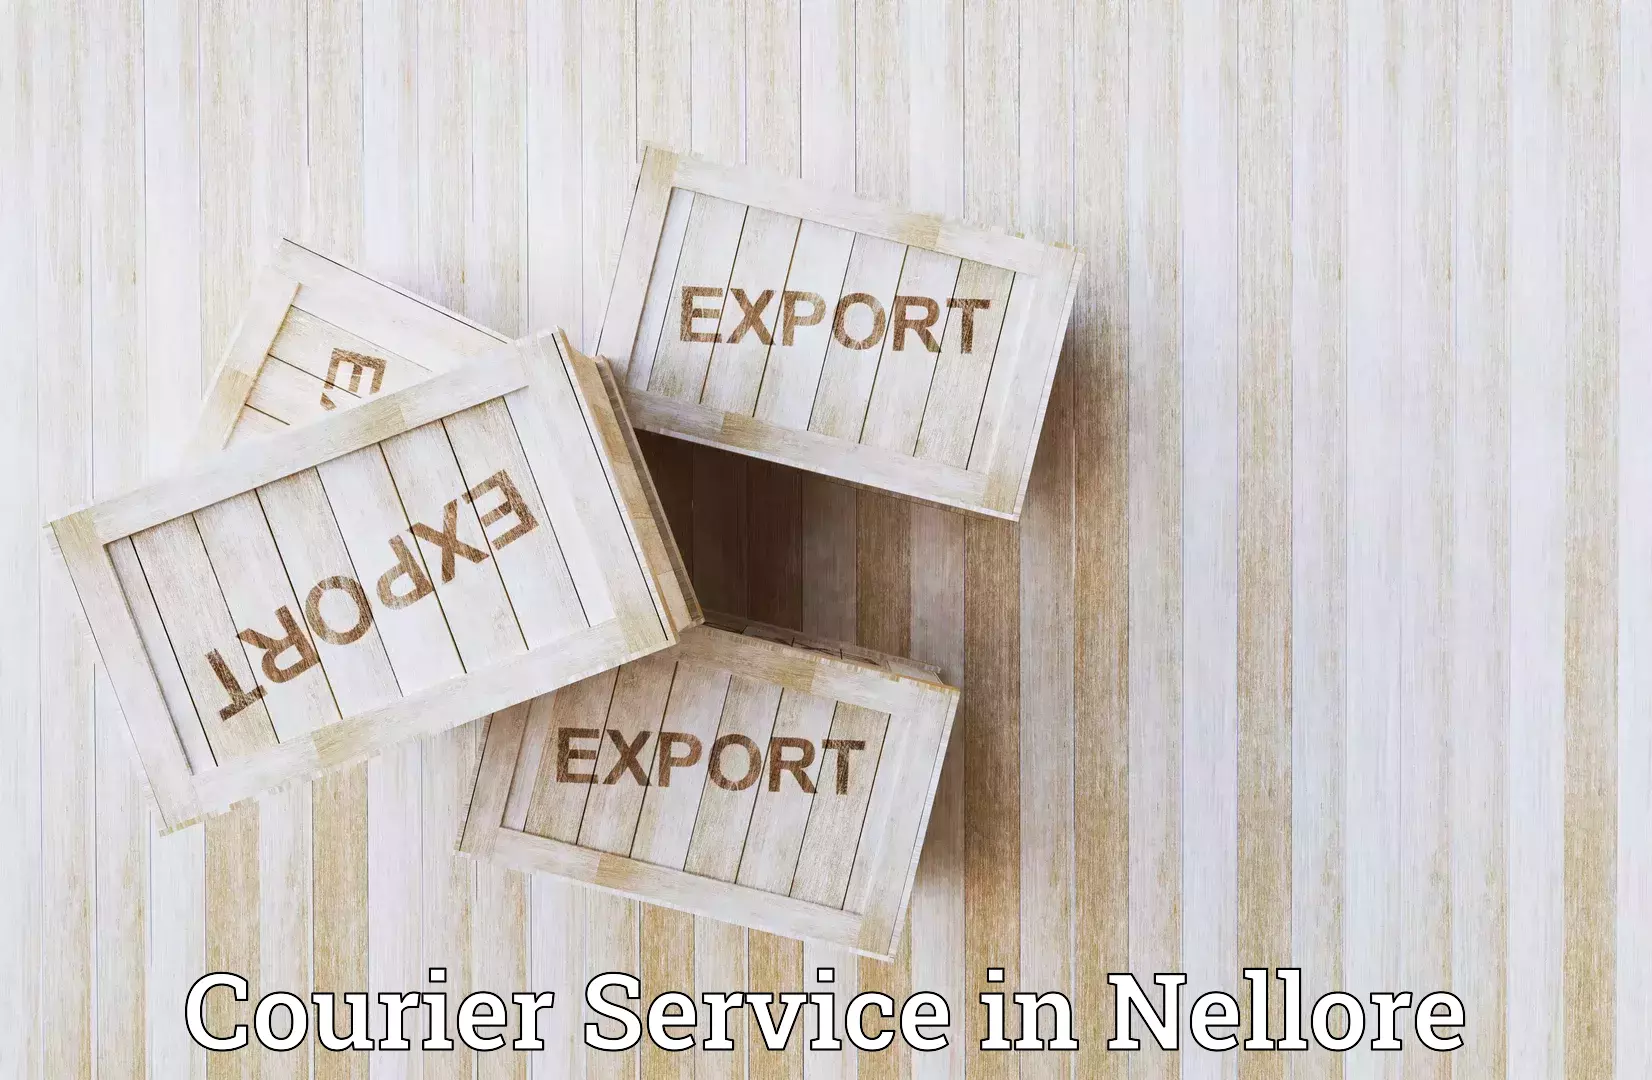 Tailored delivery services in Nellore